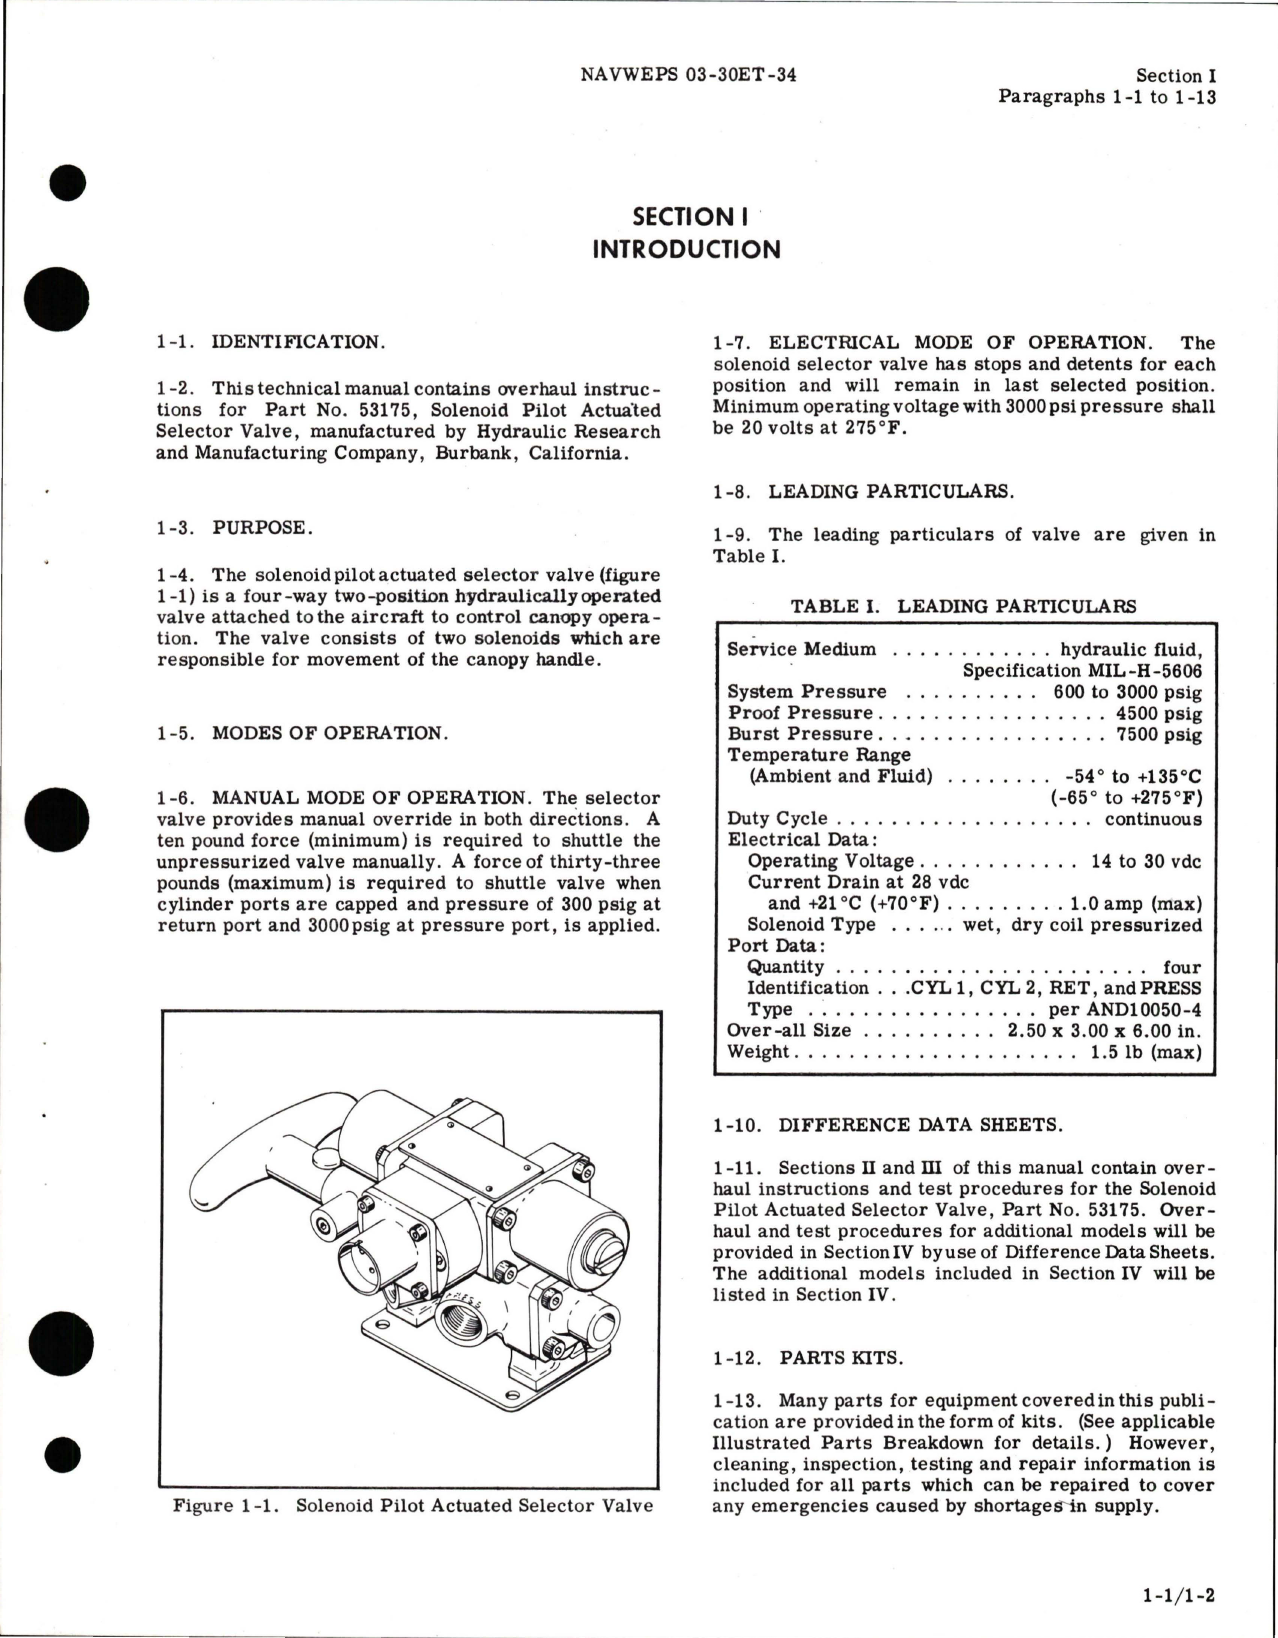 Sample page 5 from AirCorps Library document: Overhaul Instructions for Solenoid Pilot Actuated Selector Valve - Part 53175